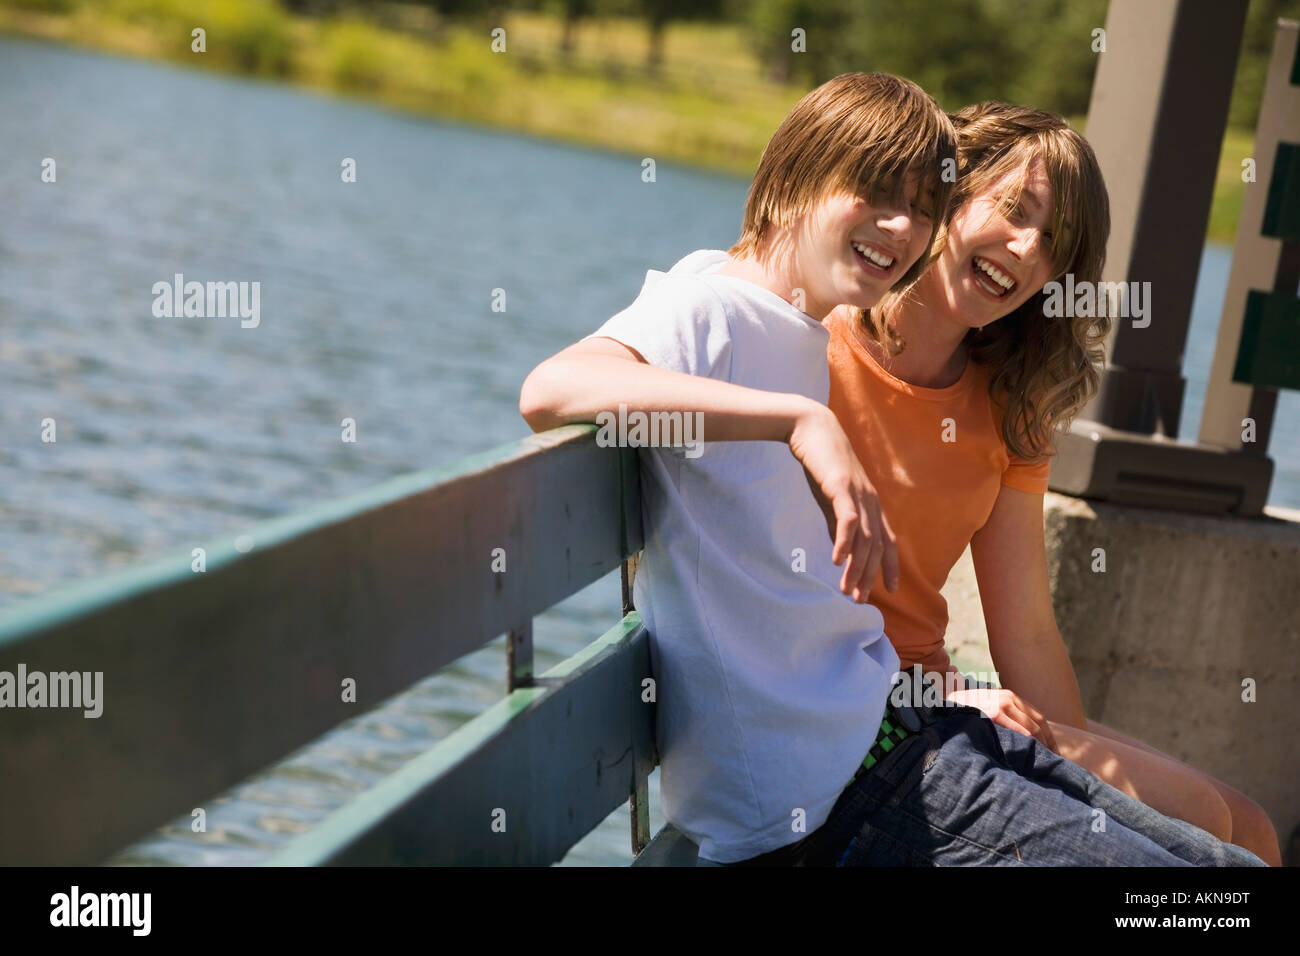 Teenagers sitting on a bench by water Stock Photo